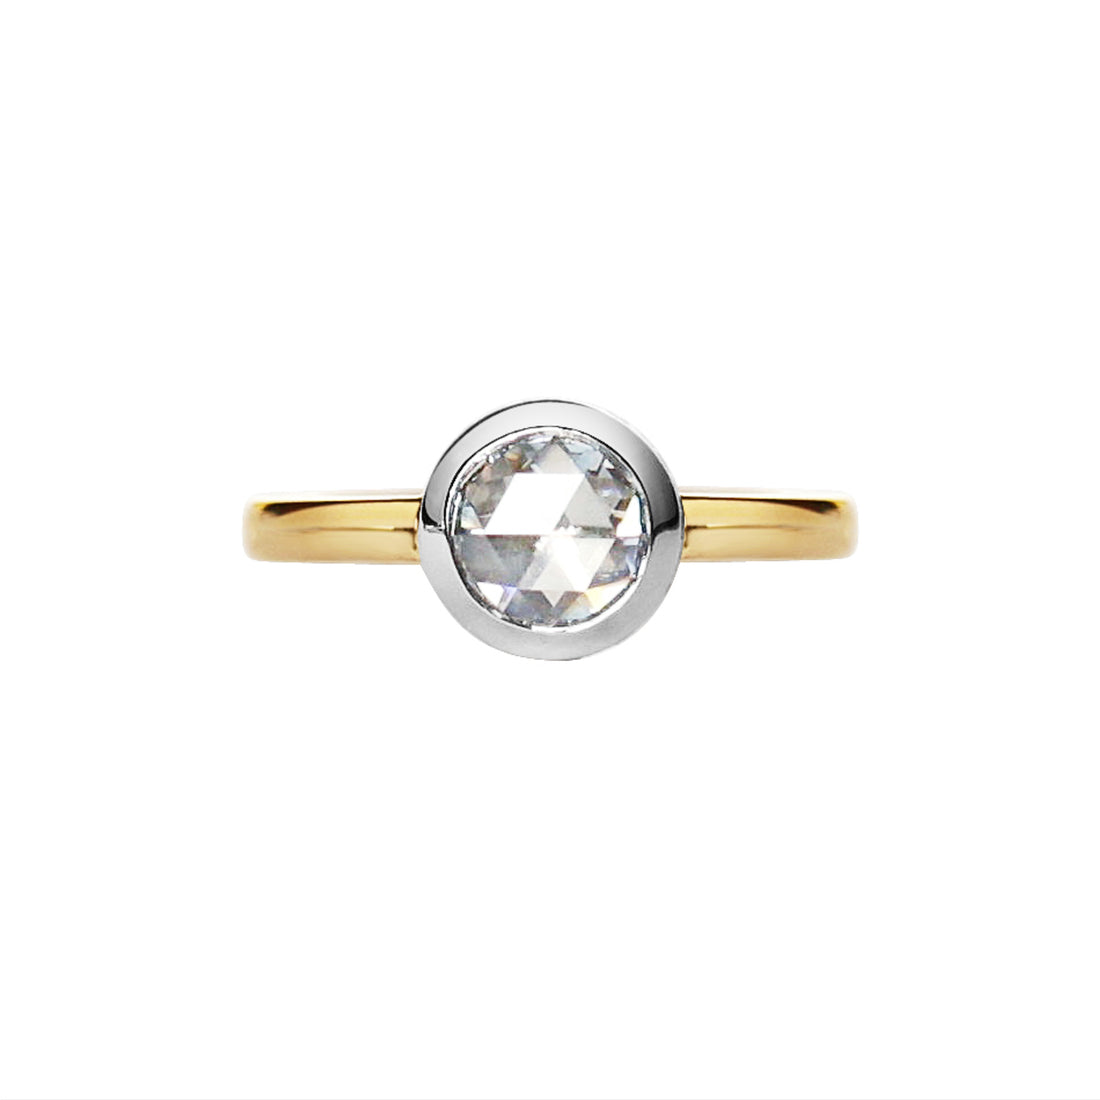  Mixed Metal Modern Diamond Solitaire Ring by Gee Woods | The Cut London